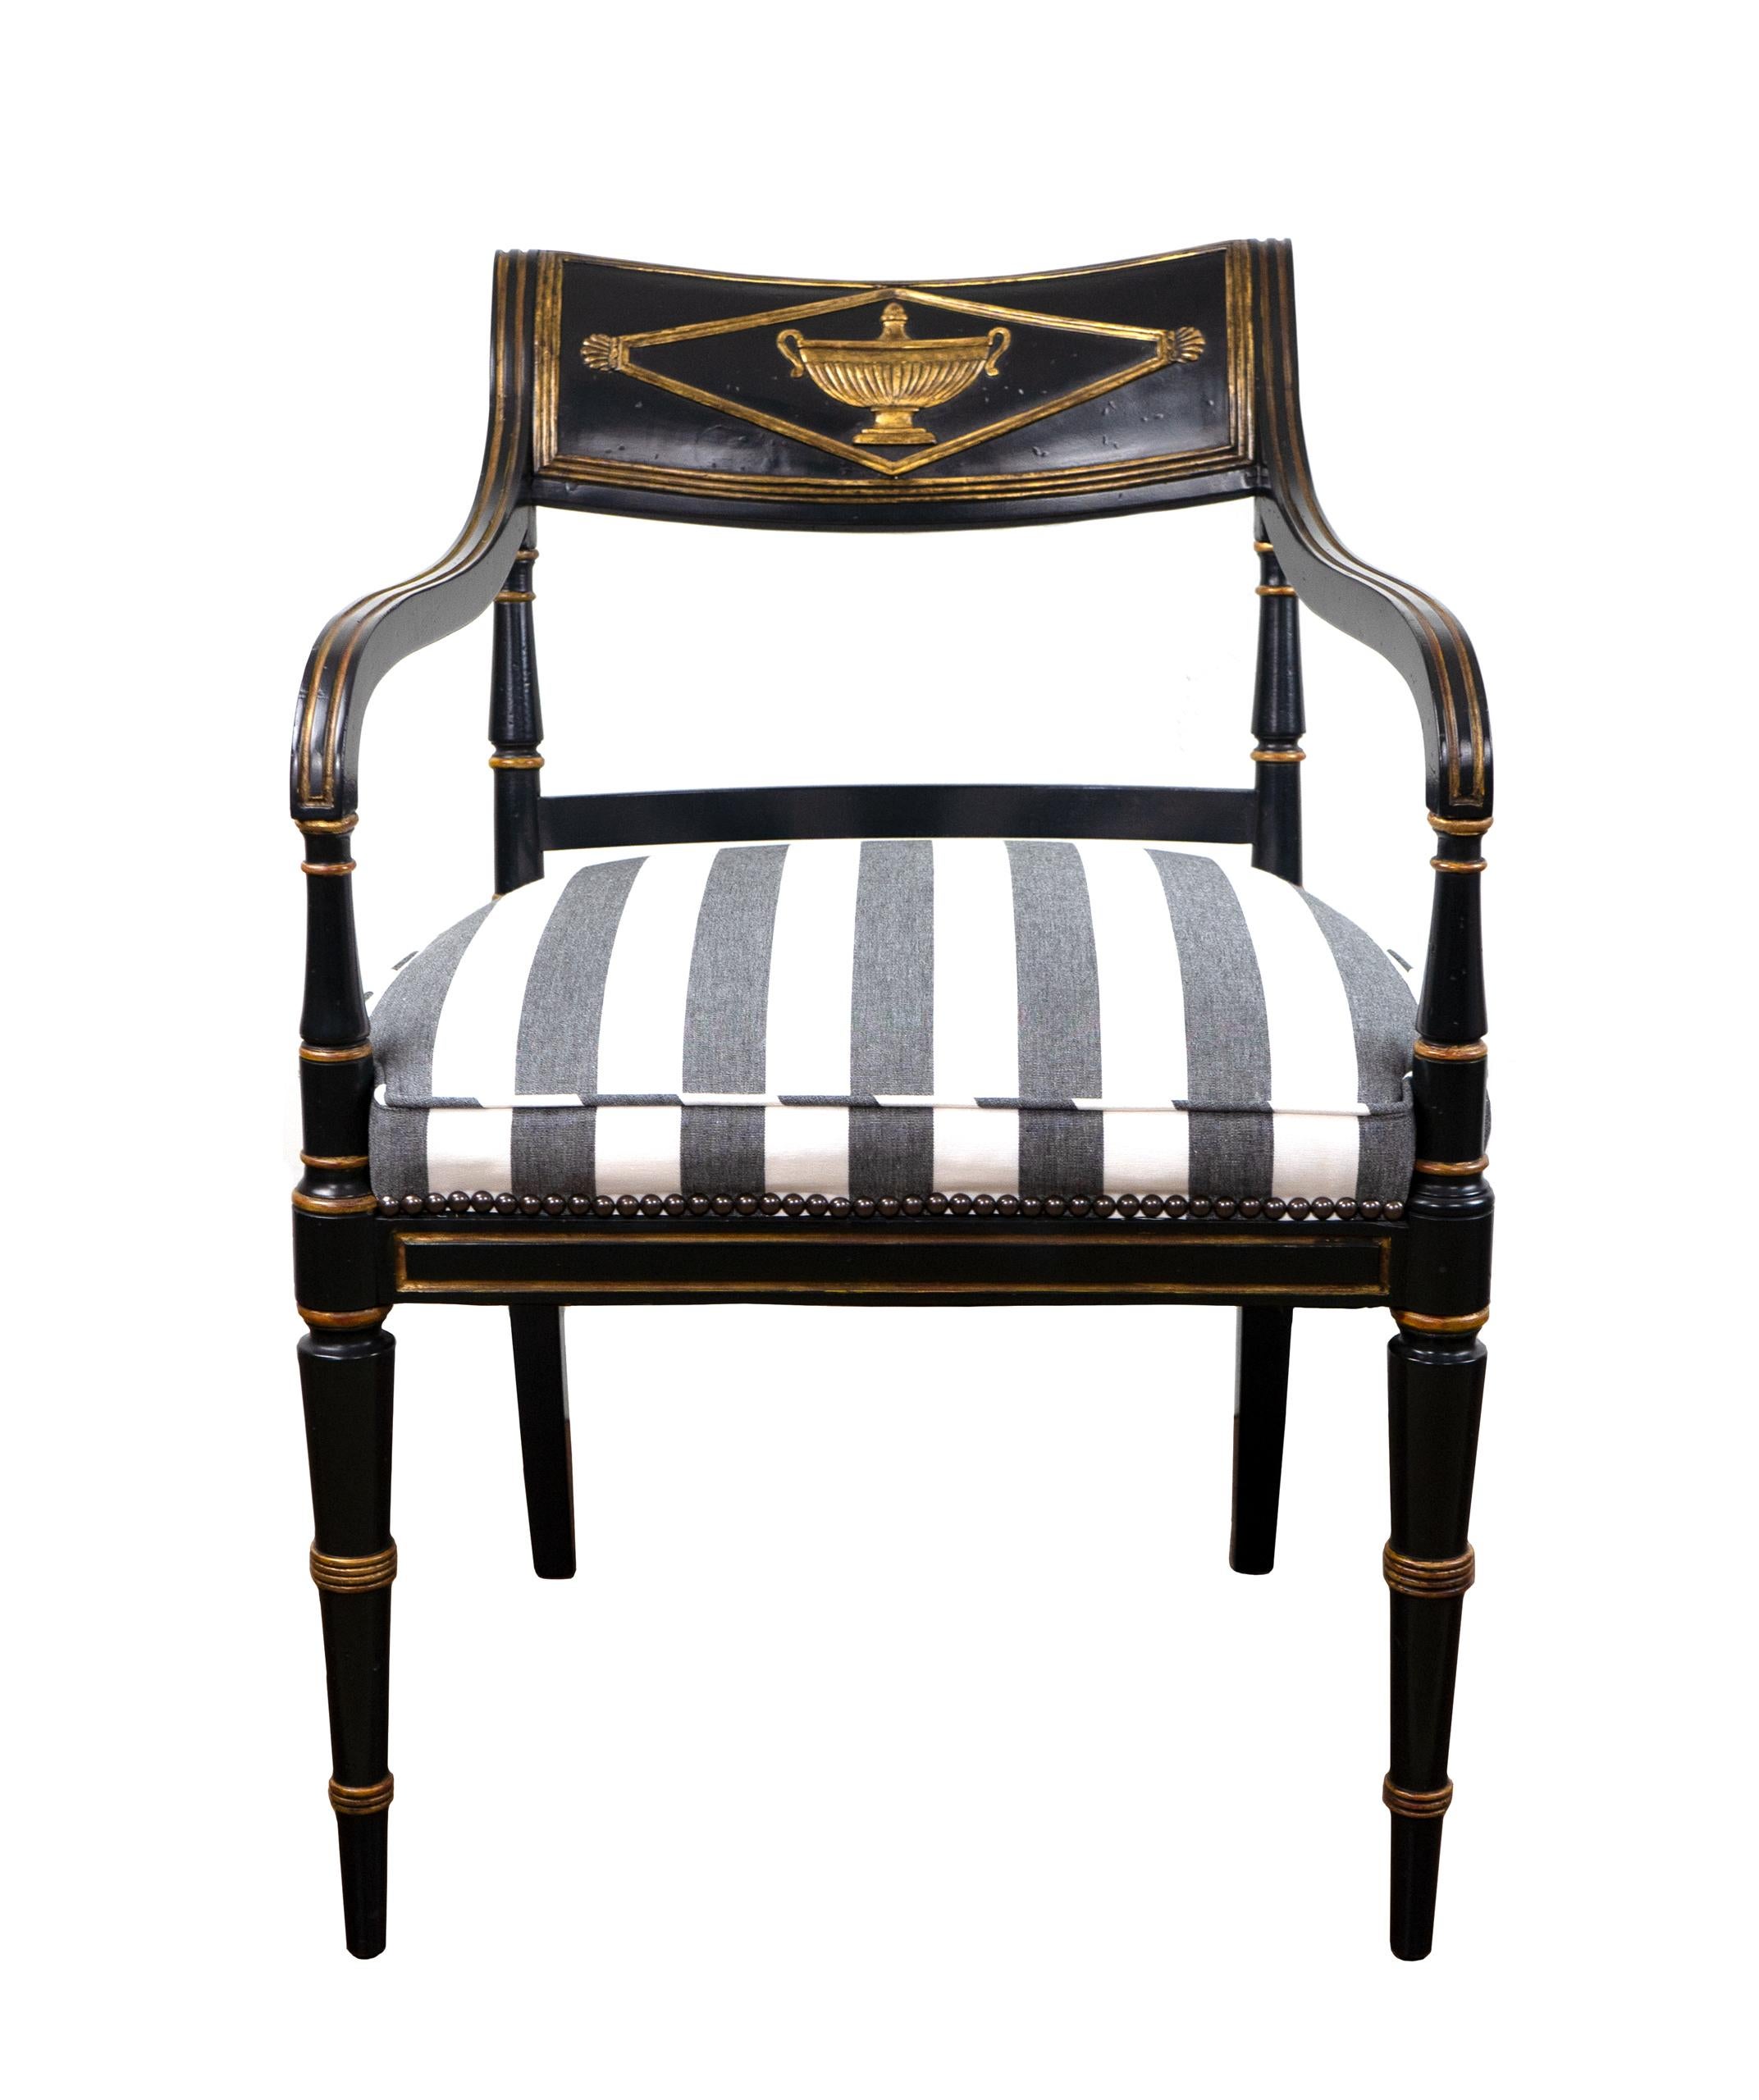 20th Century Empire Period Black Chairs with Gilding